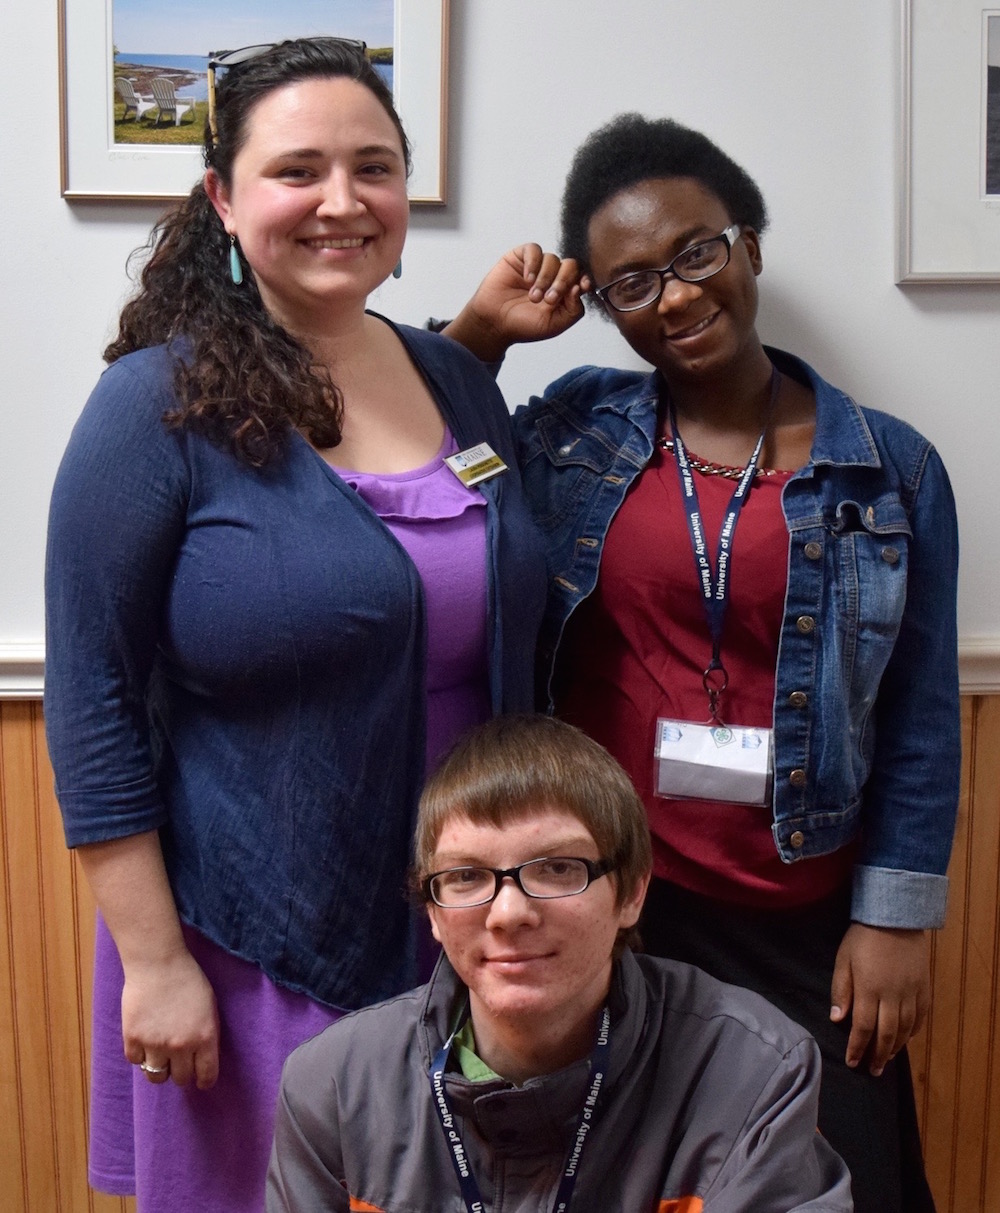 Laura Personette, Community Central Educator, and Teen Leaders Jacob and Odrine, visiting the Androscoggin/Sagadahoc Executive Committee.